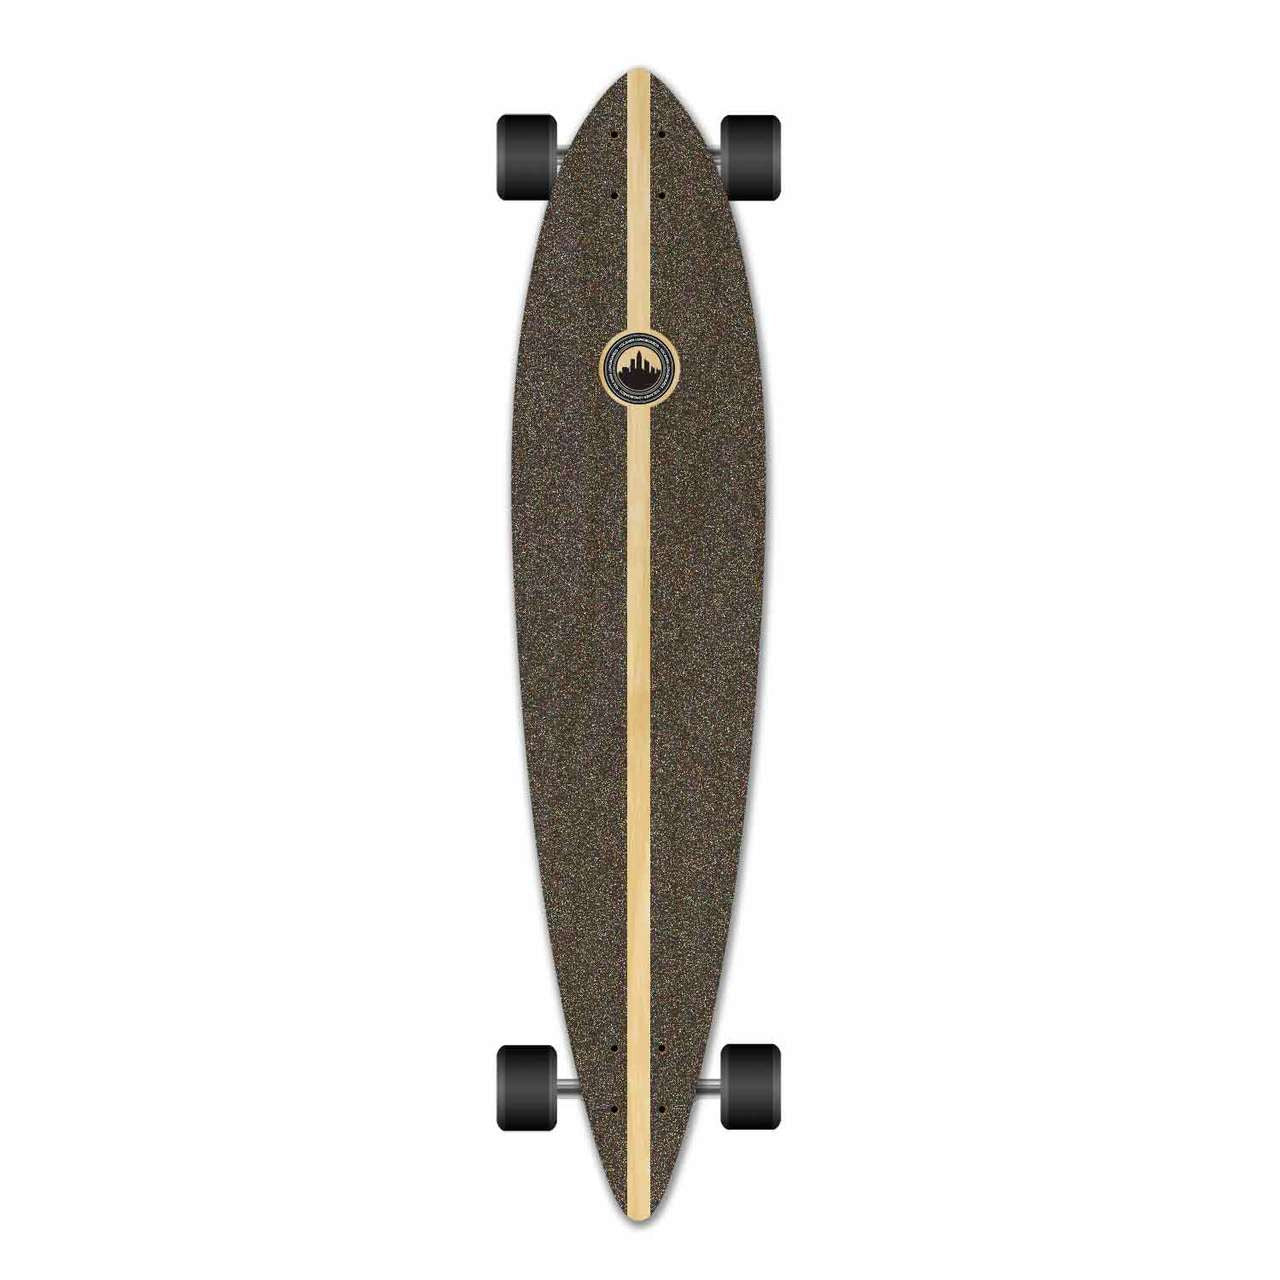 Yocaher Pintail Longboard Complete - Checker Yellow